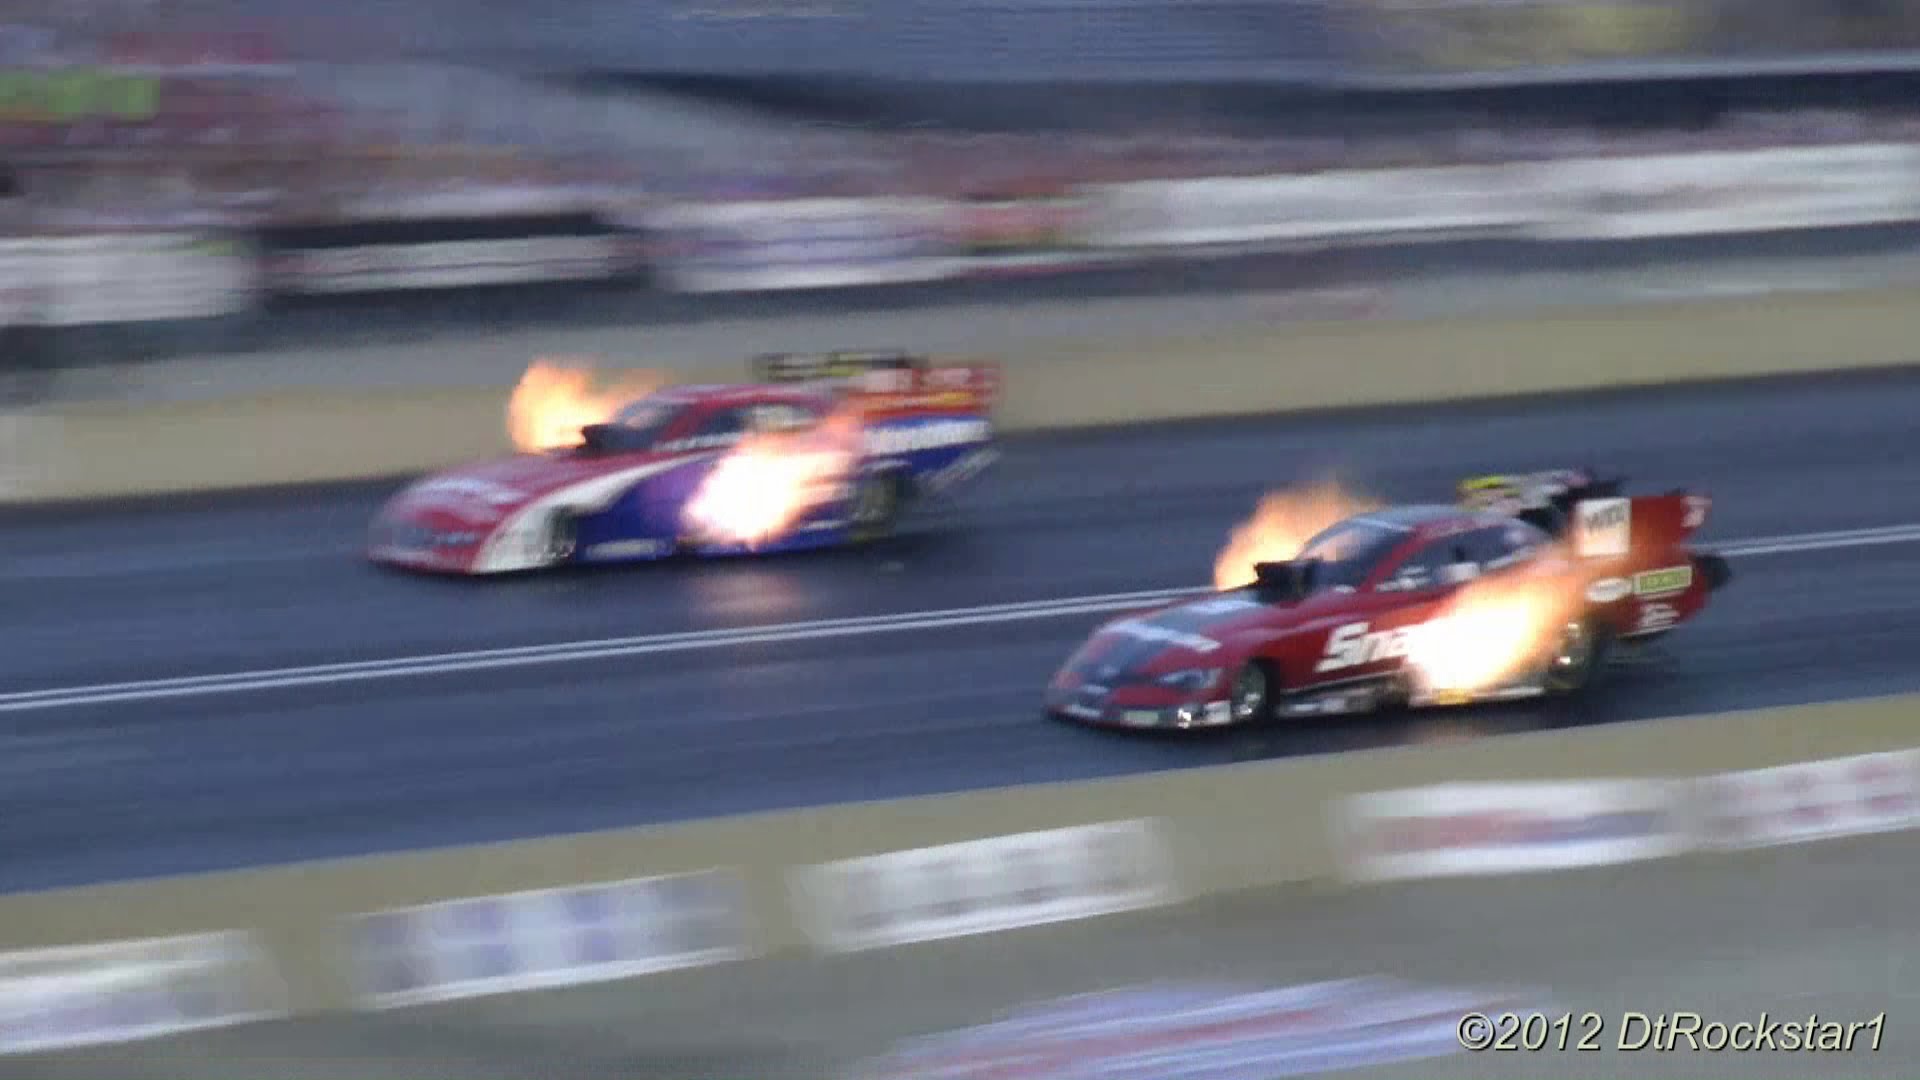 8,000 Horsepower Top Fuel Dragsters @ 300 mph